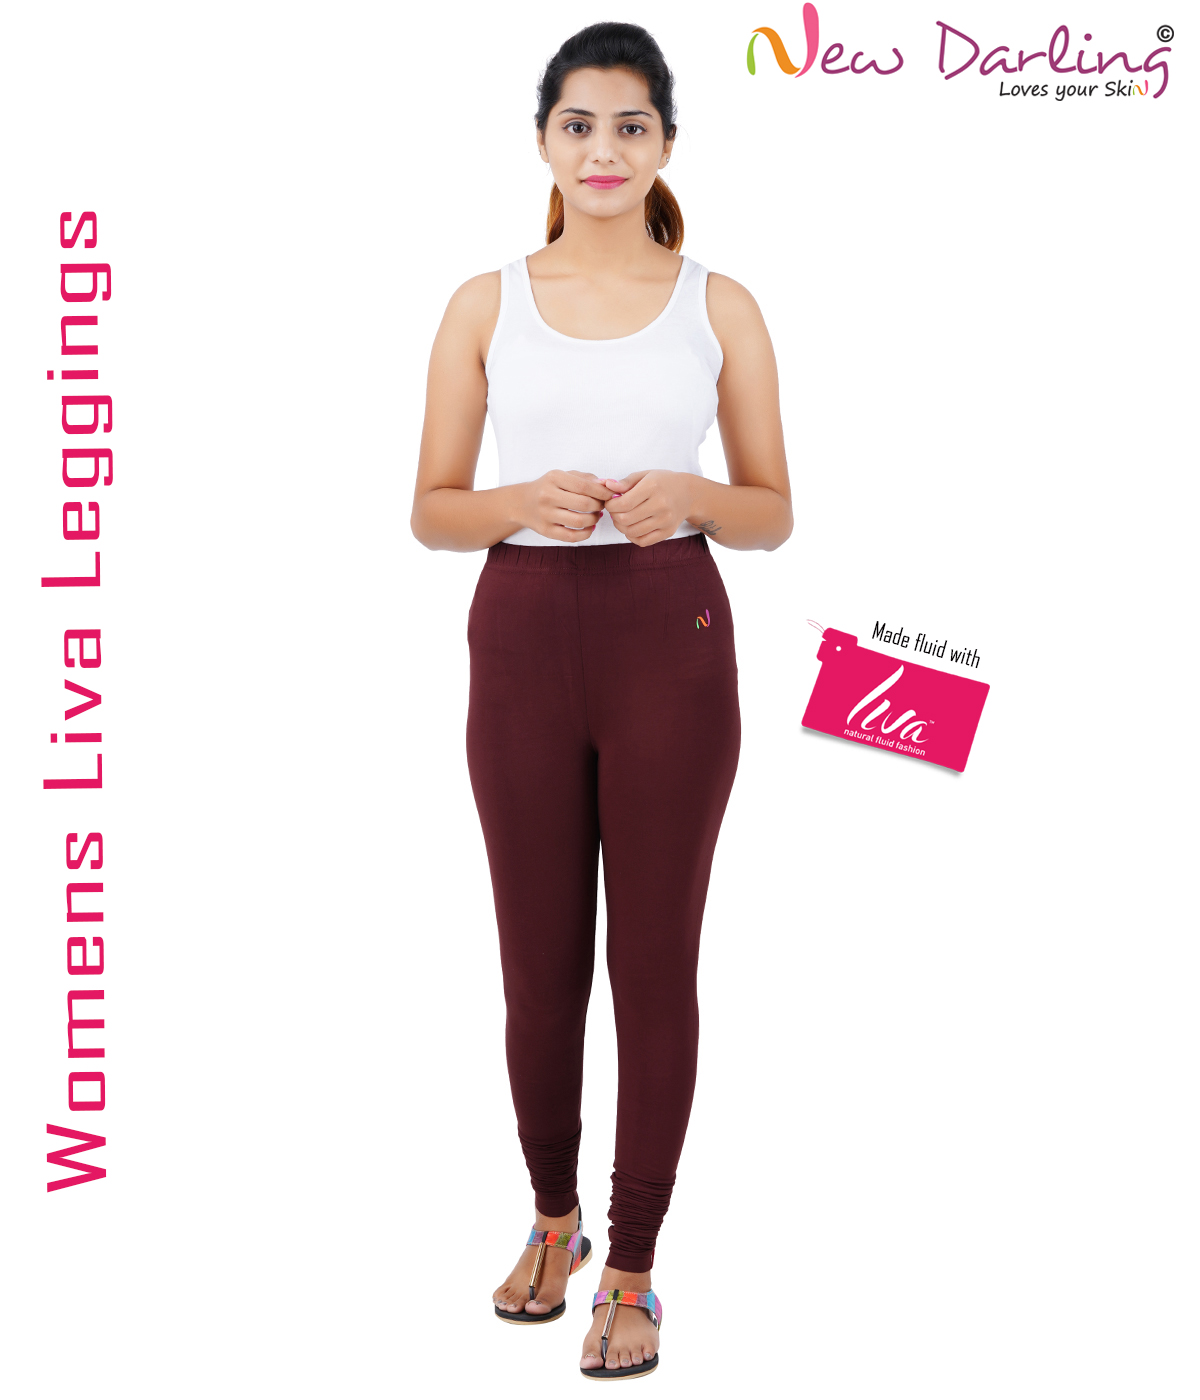 Shop Prisma's Strawberry Ankle Leggings for Comfort & Style